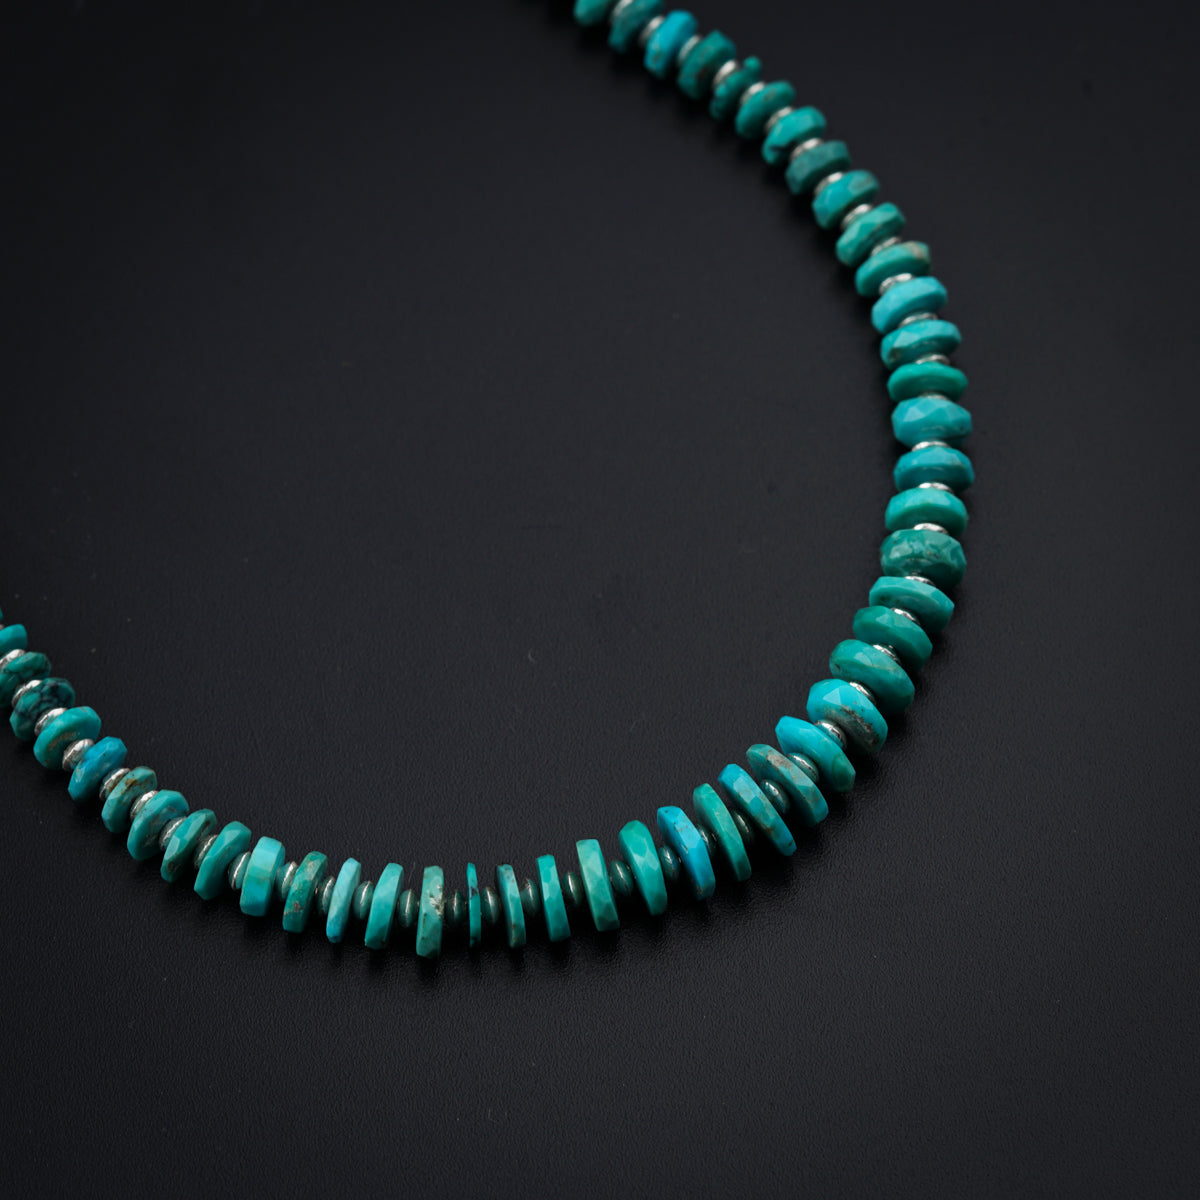 Silver and turquoise chain